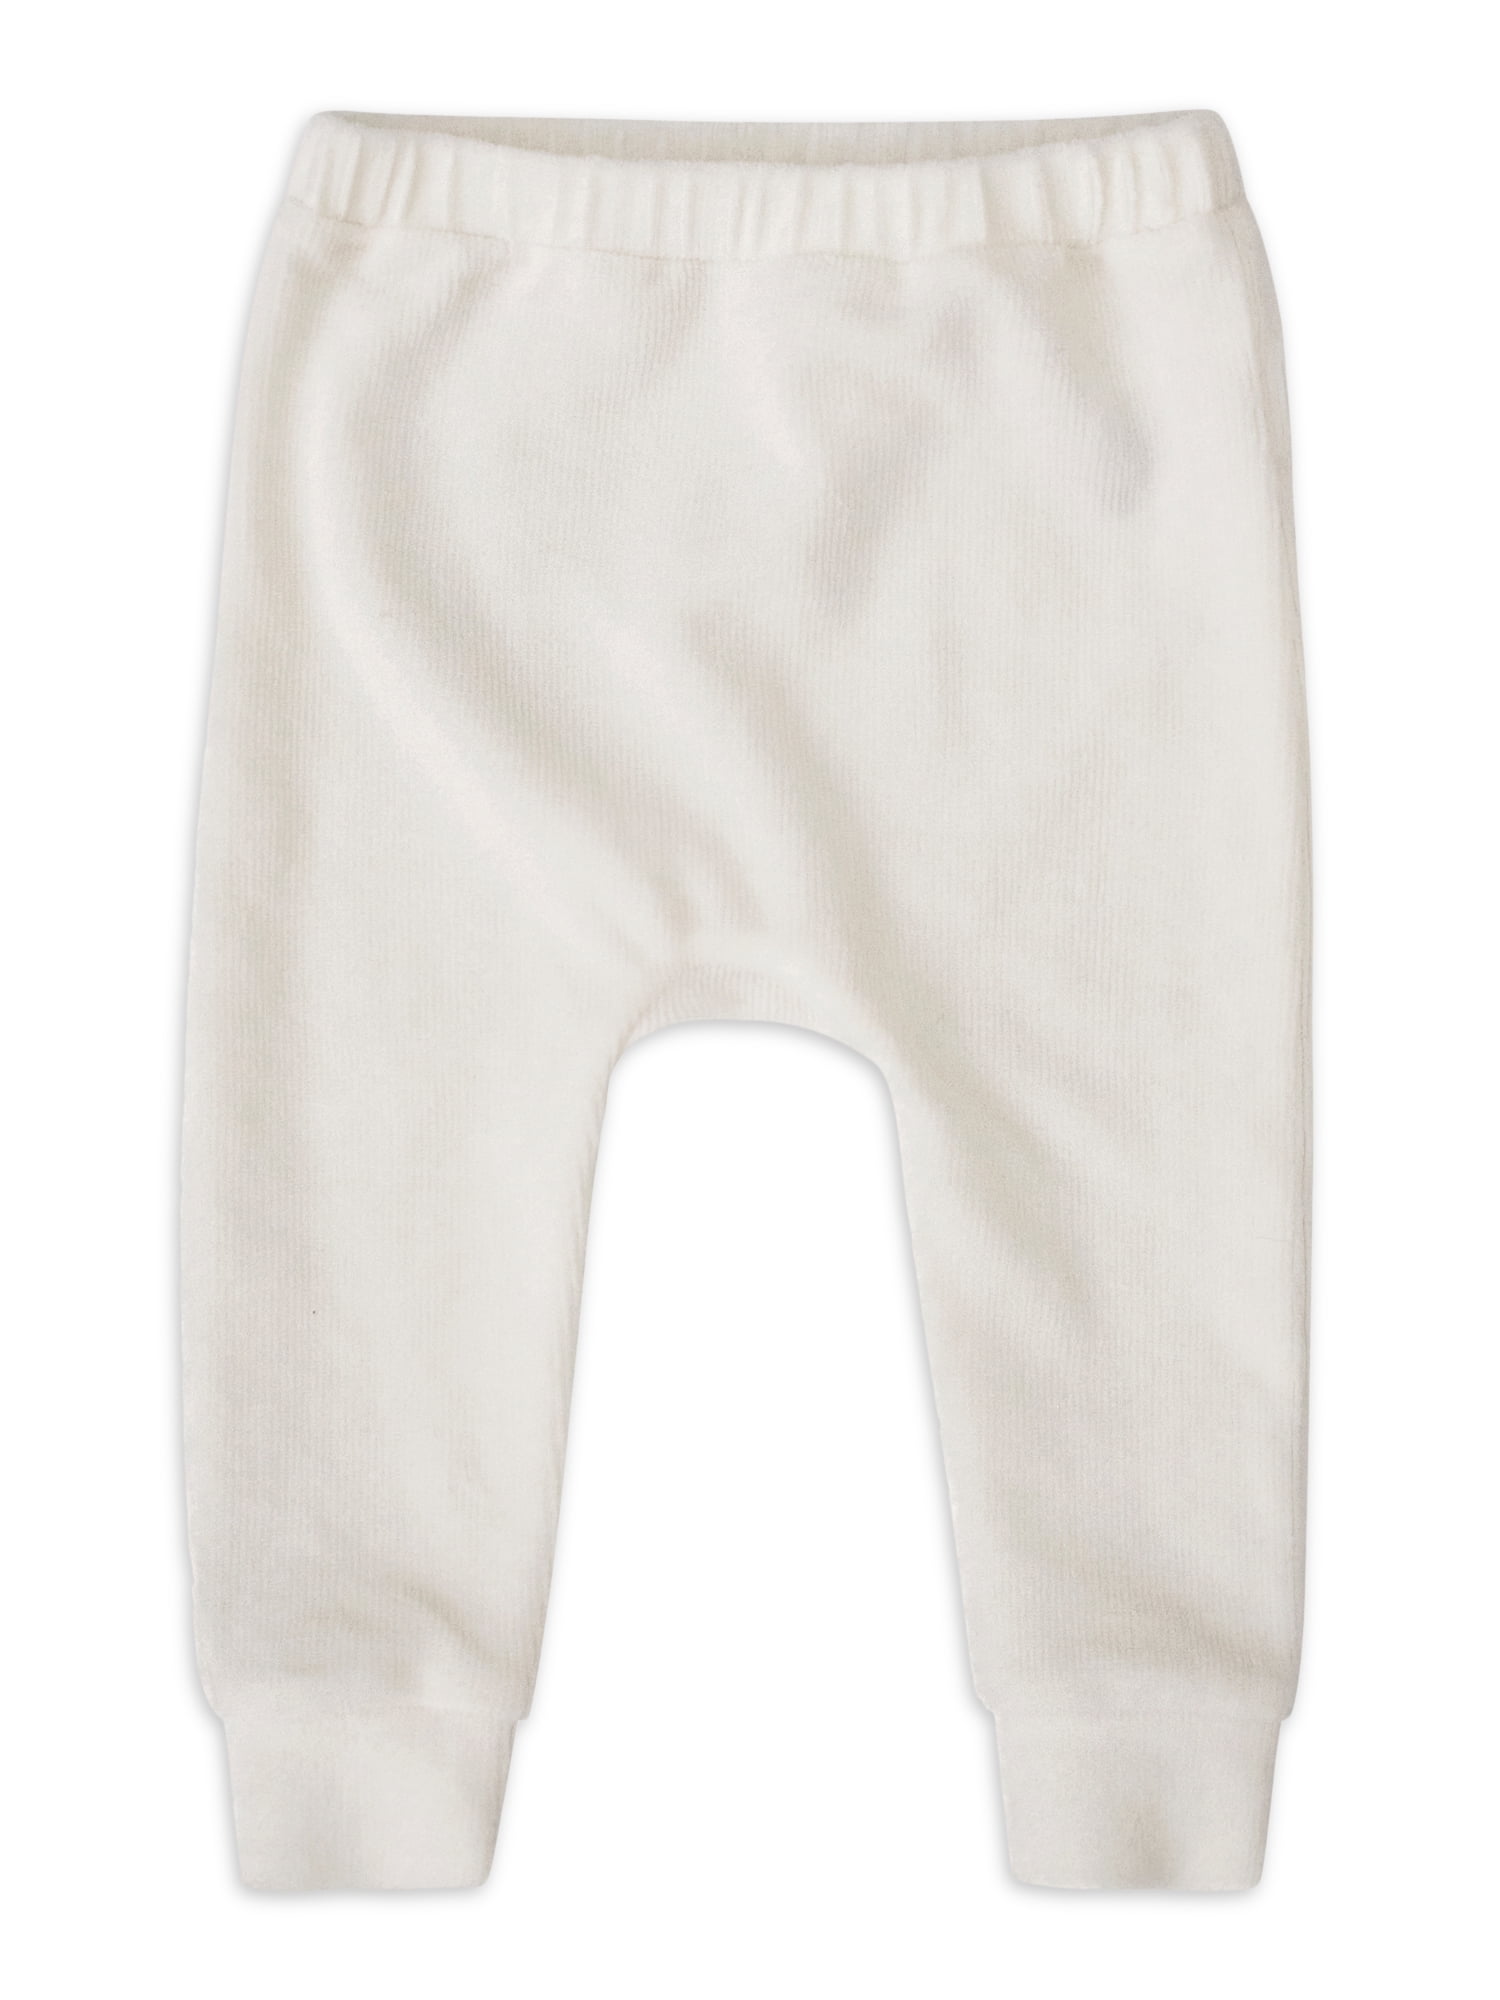 kugle handicappet fossil Modern Moments by Gerber Baby Boy or Girl Gender Neutral Long Sleeve Velour  Top & Pant, 2-Piece Outfit Set, Sizes 0/3-24 Months - Walmart.com